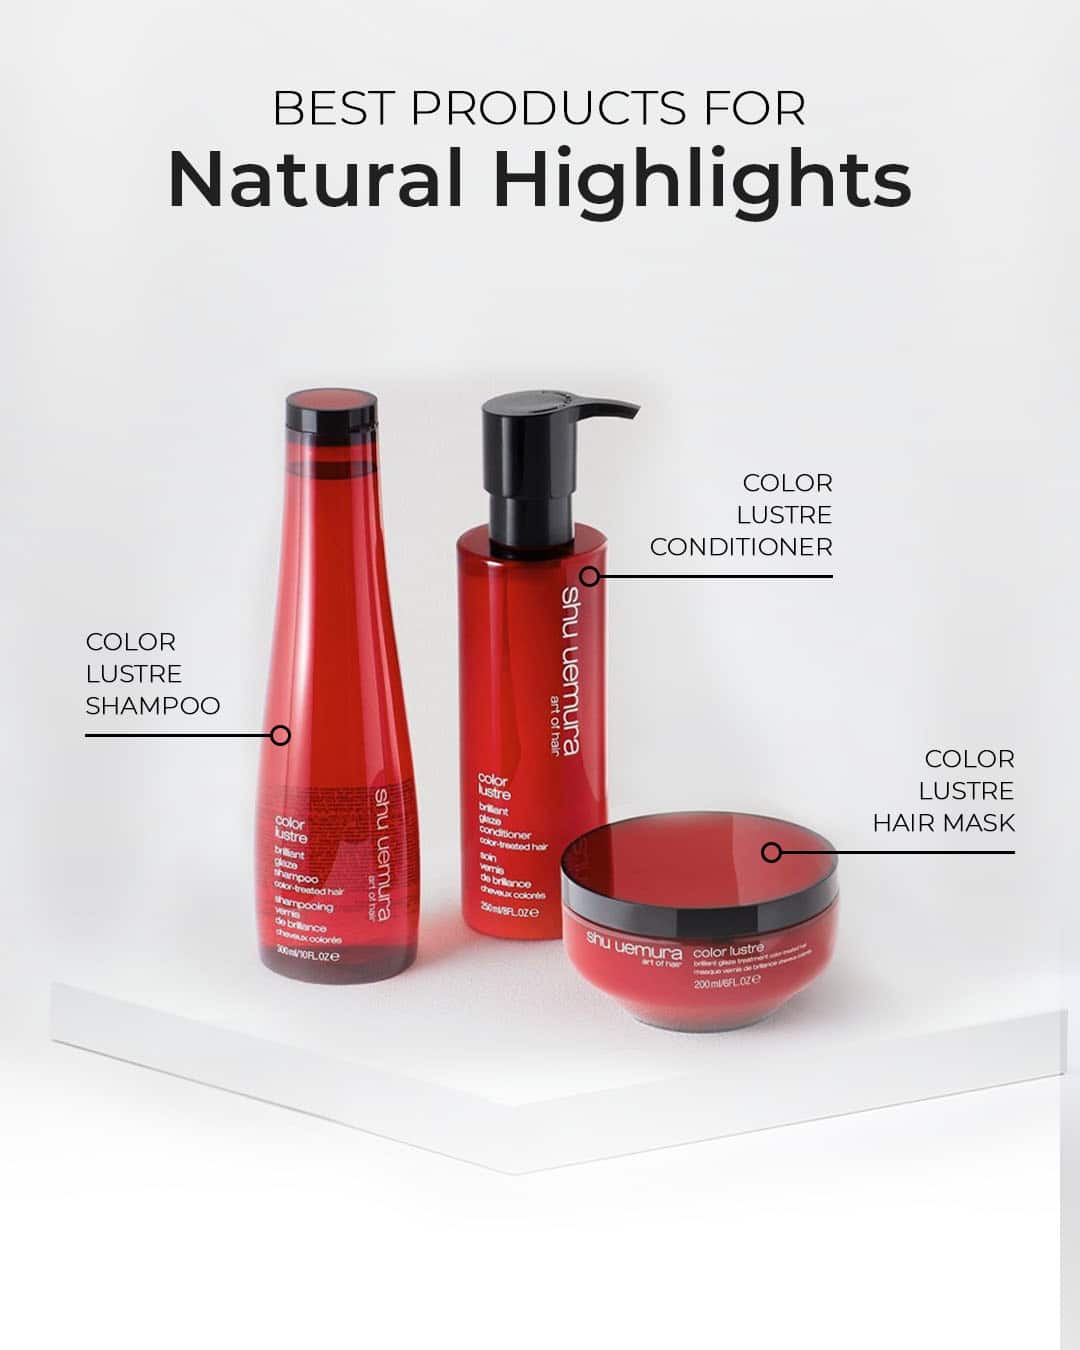 Shu Uemura's Color Lustre products for lighter highlights hair